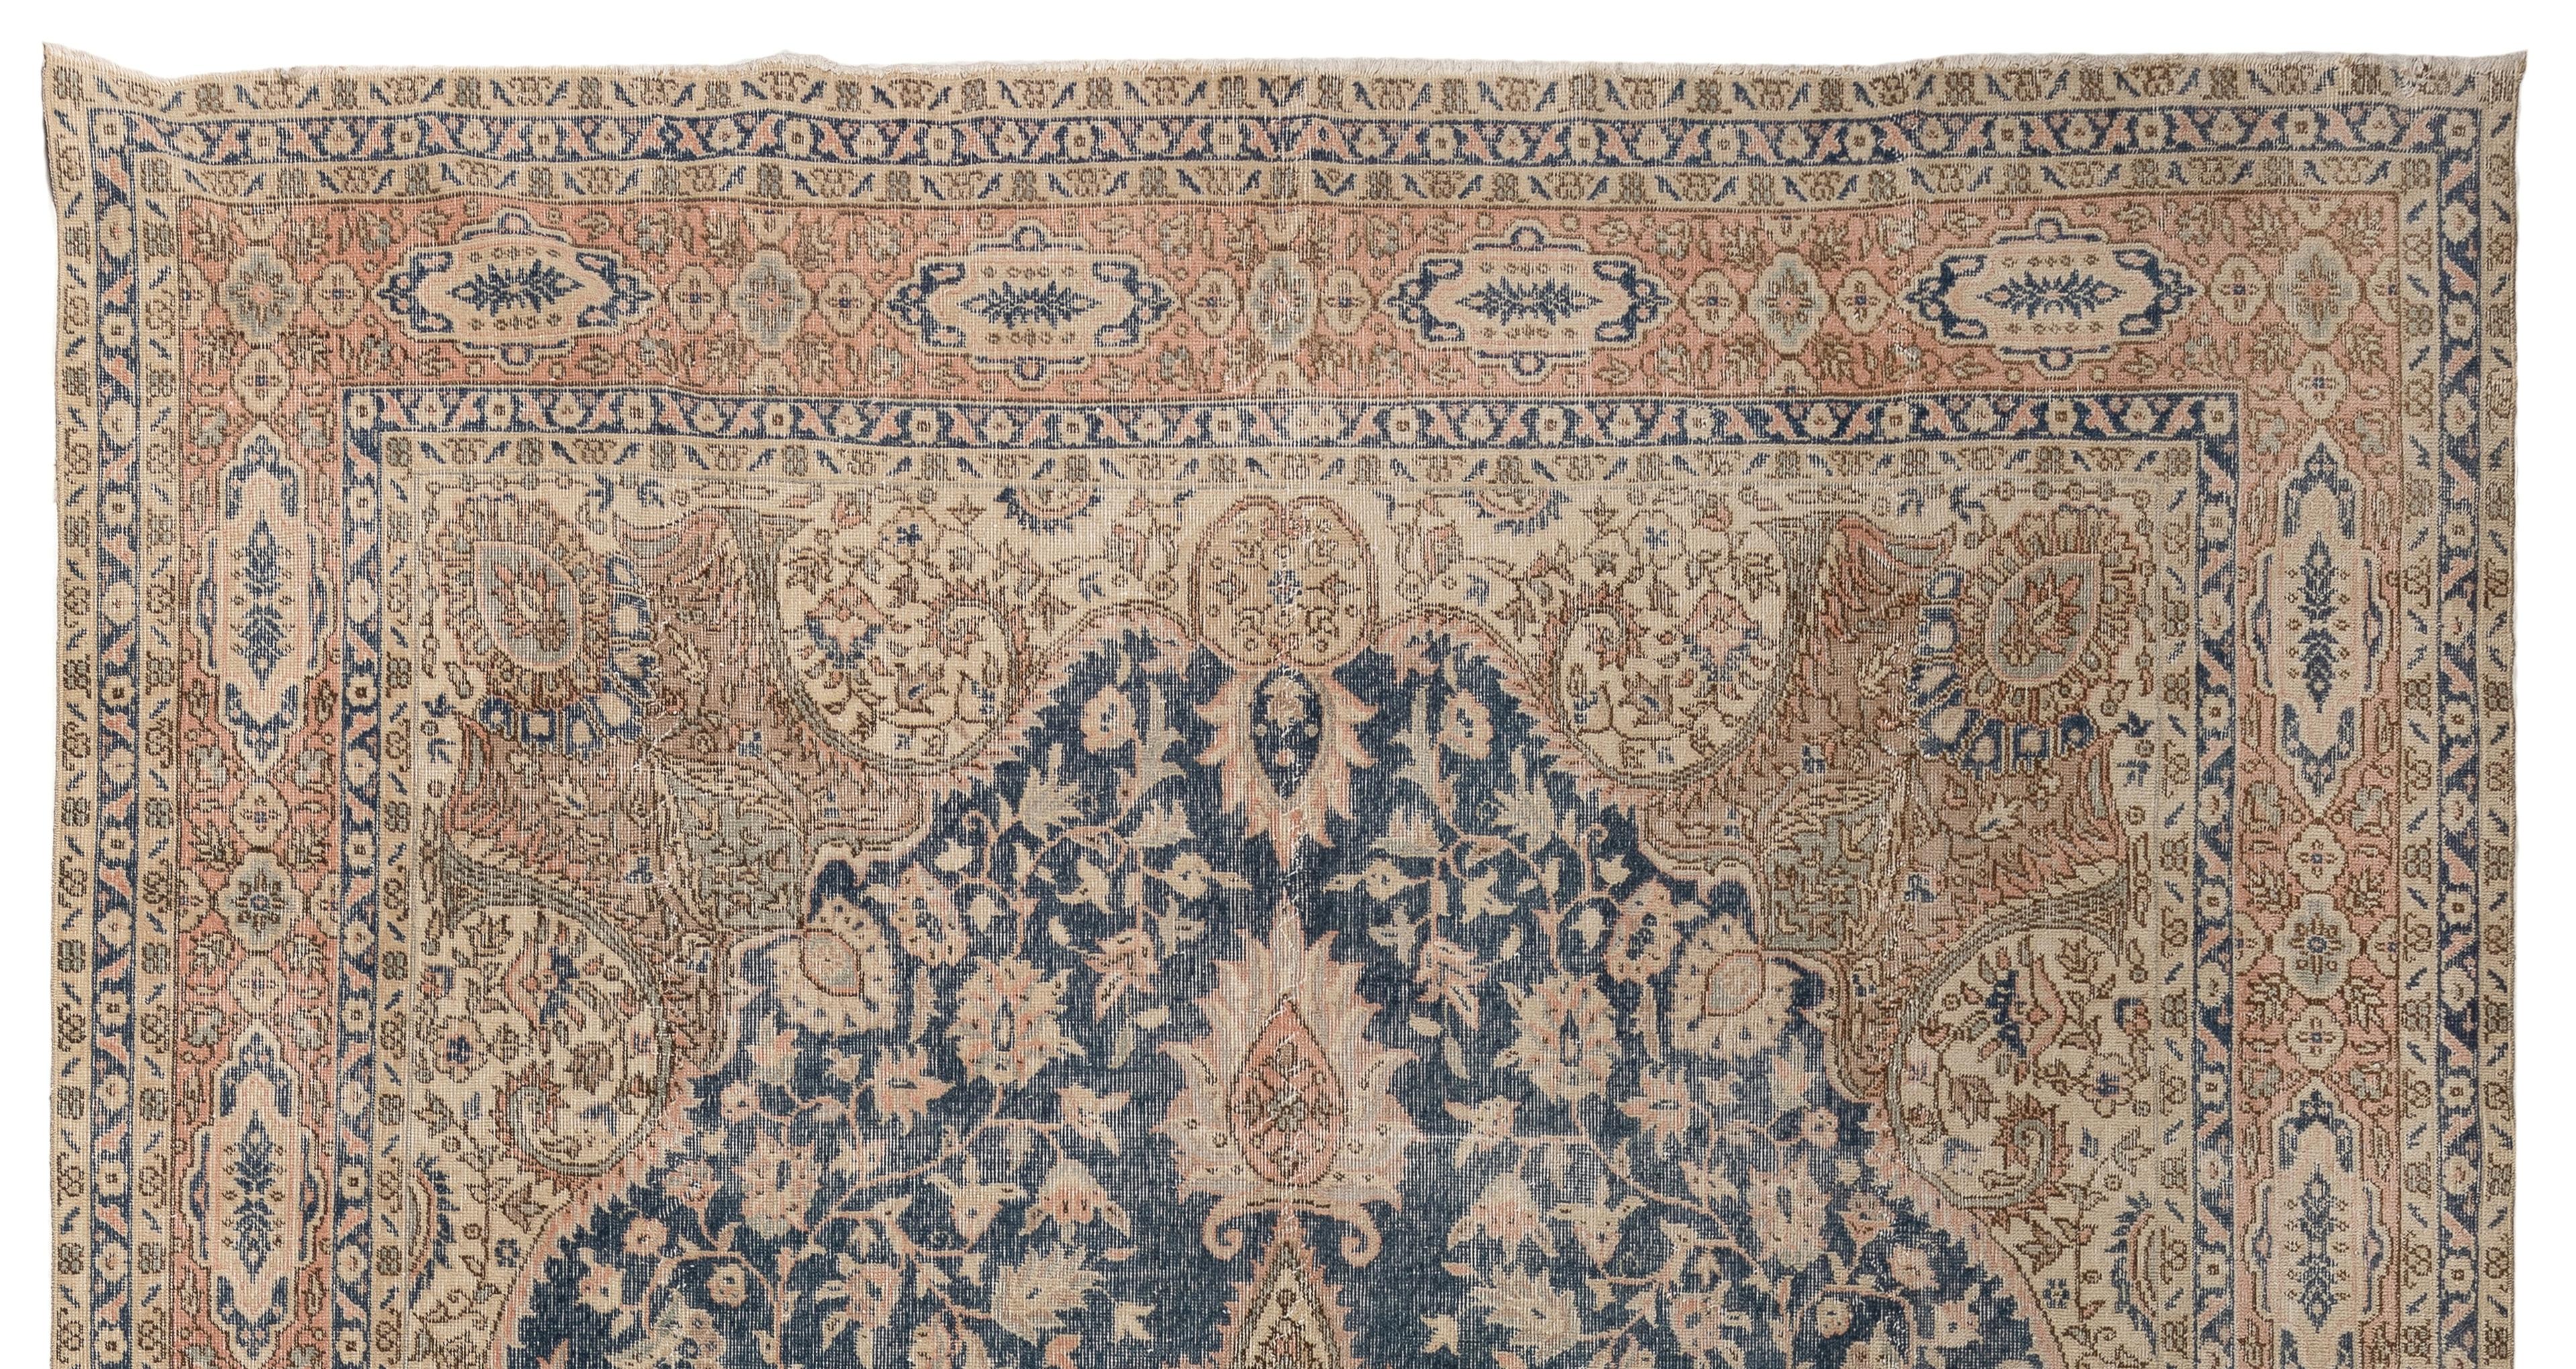 A very finely hand knotted large vintage rug from Turkey in a color palette of stone beige, salmon pink, light blue and navy blue. The intricate design is very skillfully executed from the curvilinear medallion to the similarly shaped field in which